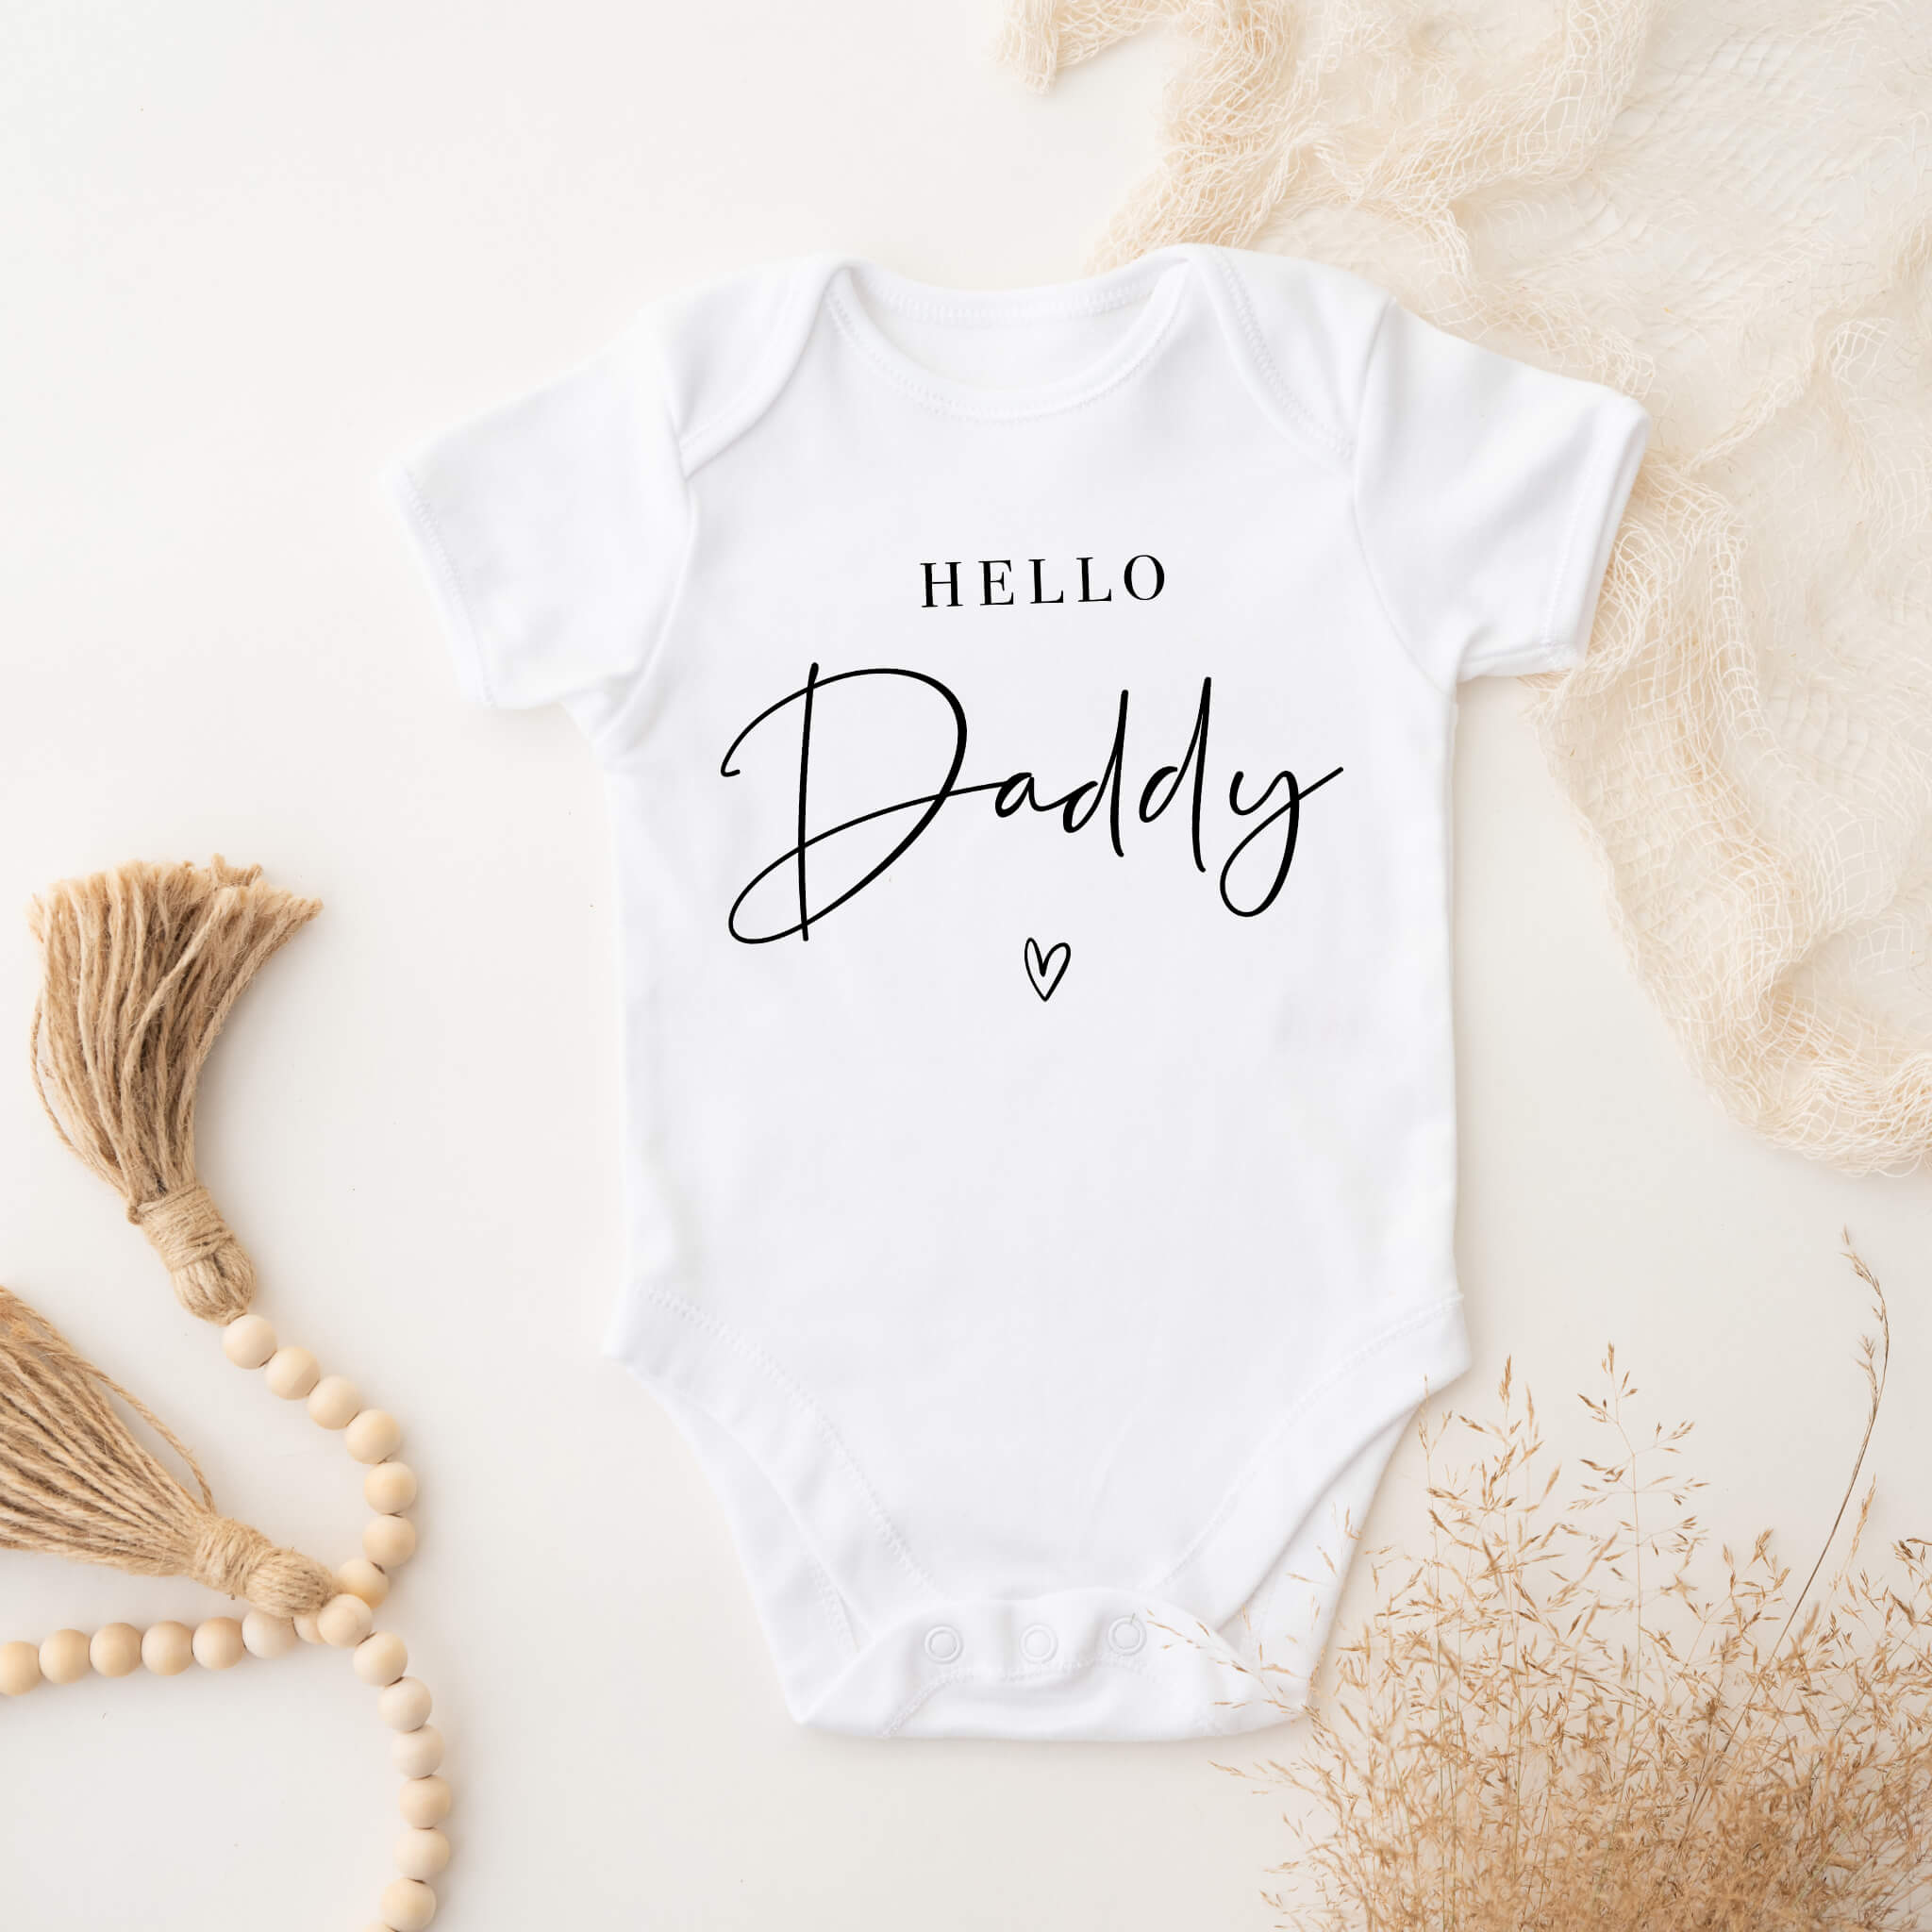 Personalized Pregnancy Announcement, Hello Daddy, Dad, Dada To Be, Customized Baby Announcement Onesie, Personalized Pregnancy Announcement Gift Box, Personalized Baby Announcement Gift Box